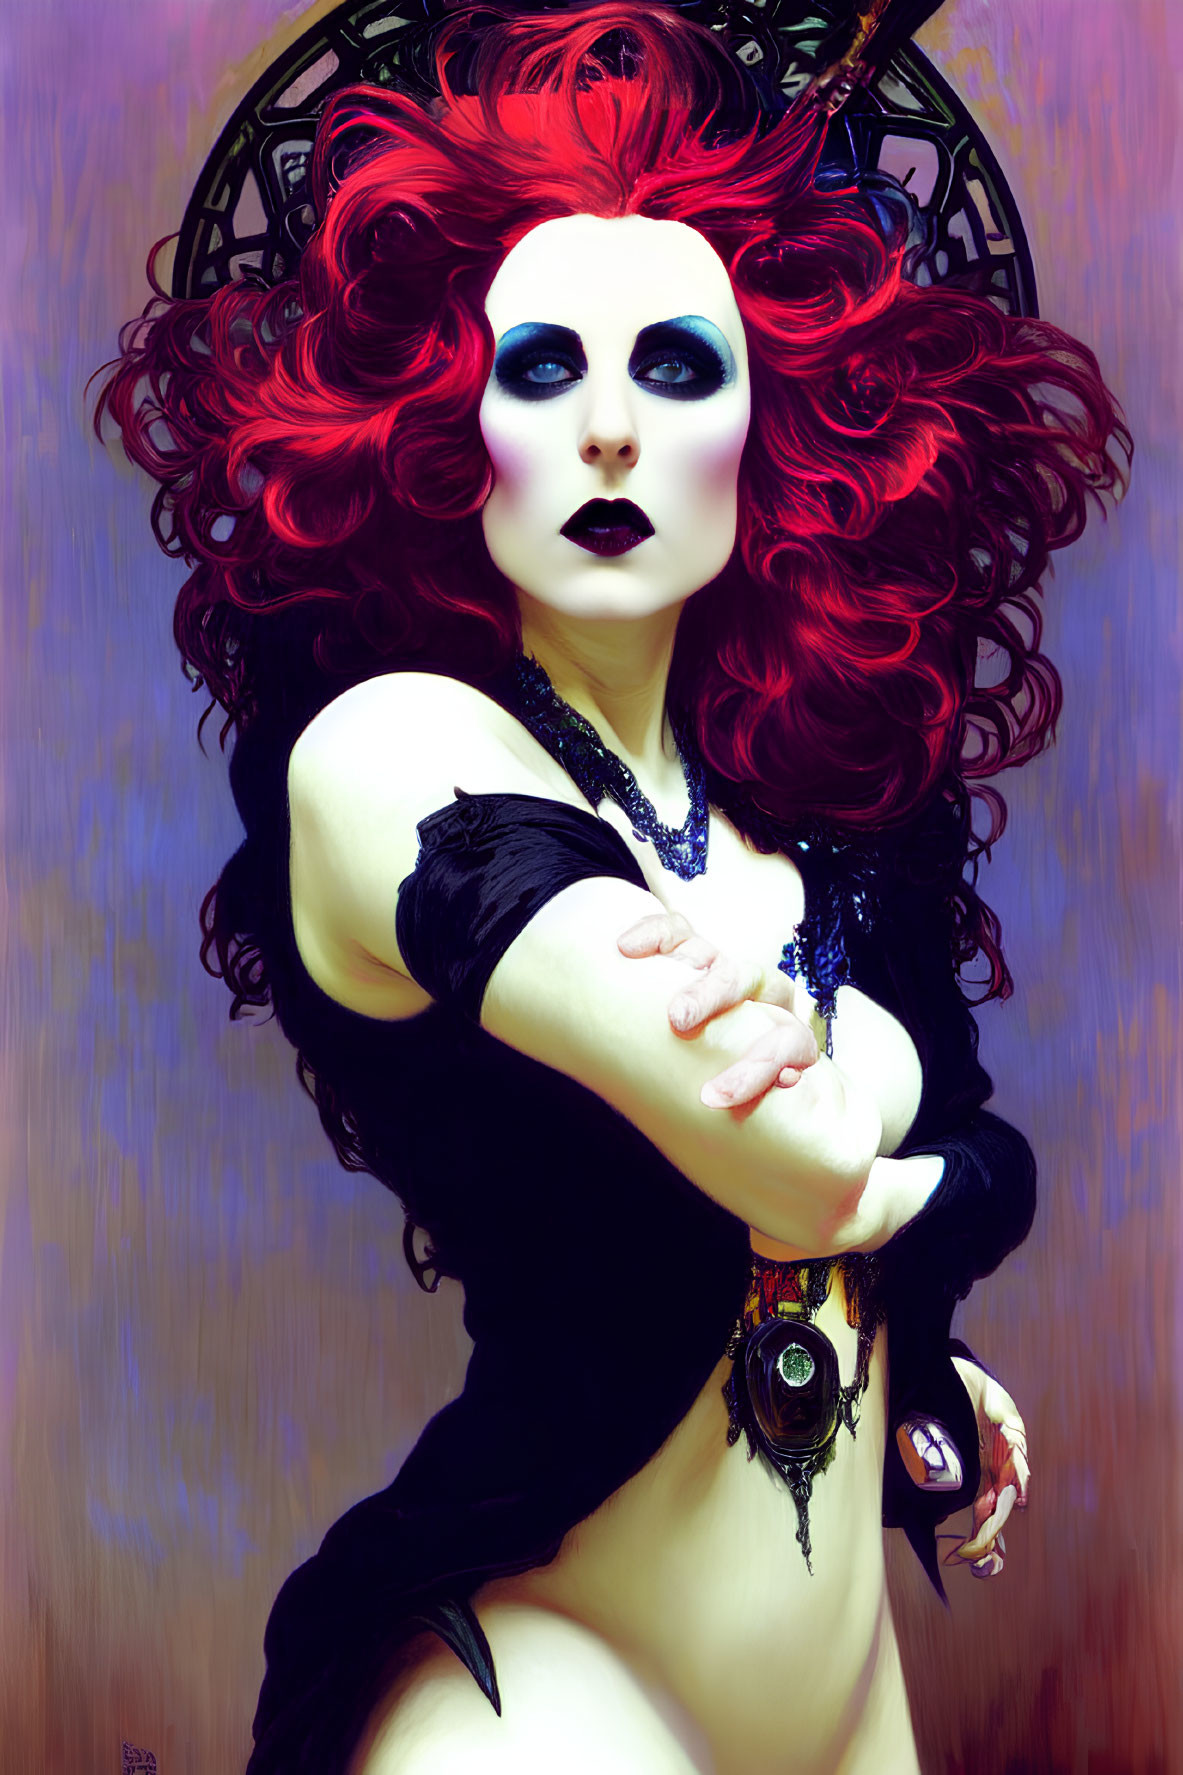 Stylized image of woman with red hair and dark makeup